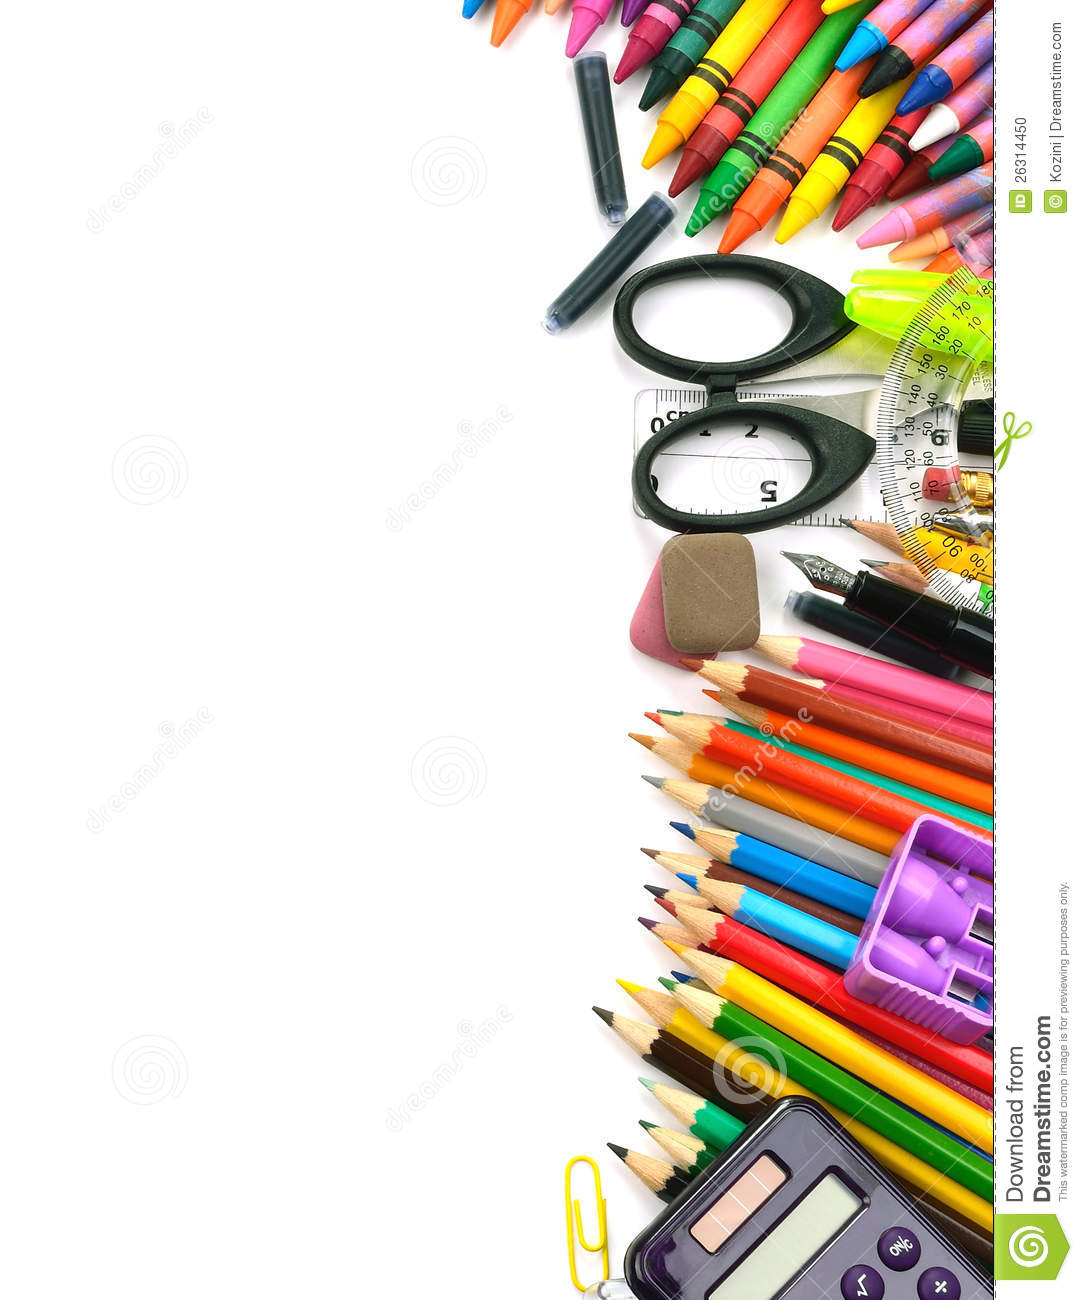 Office Supplies Background   Clipart Panda   Free Clipart Images